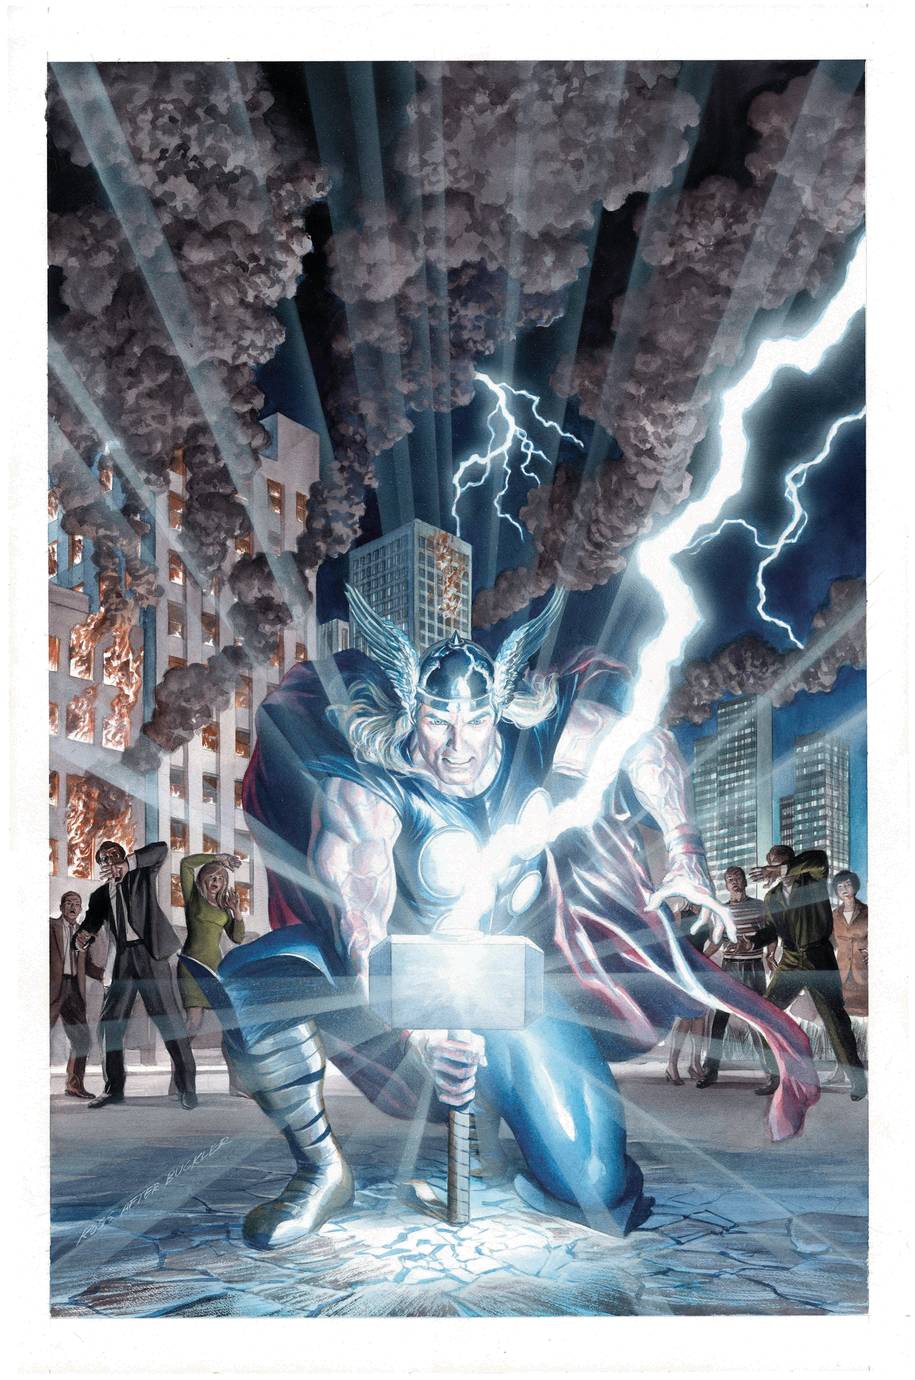 The Mighty Thor #701 by Ross Poster